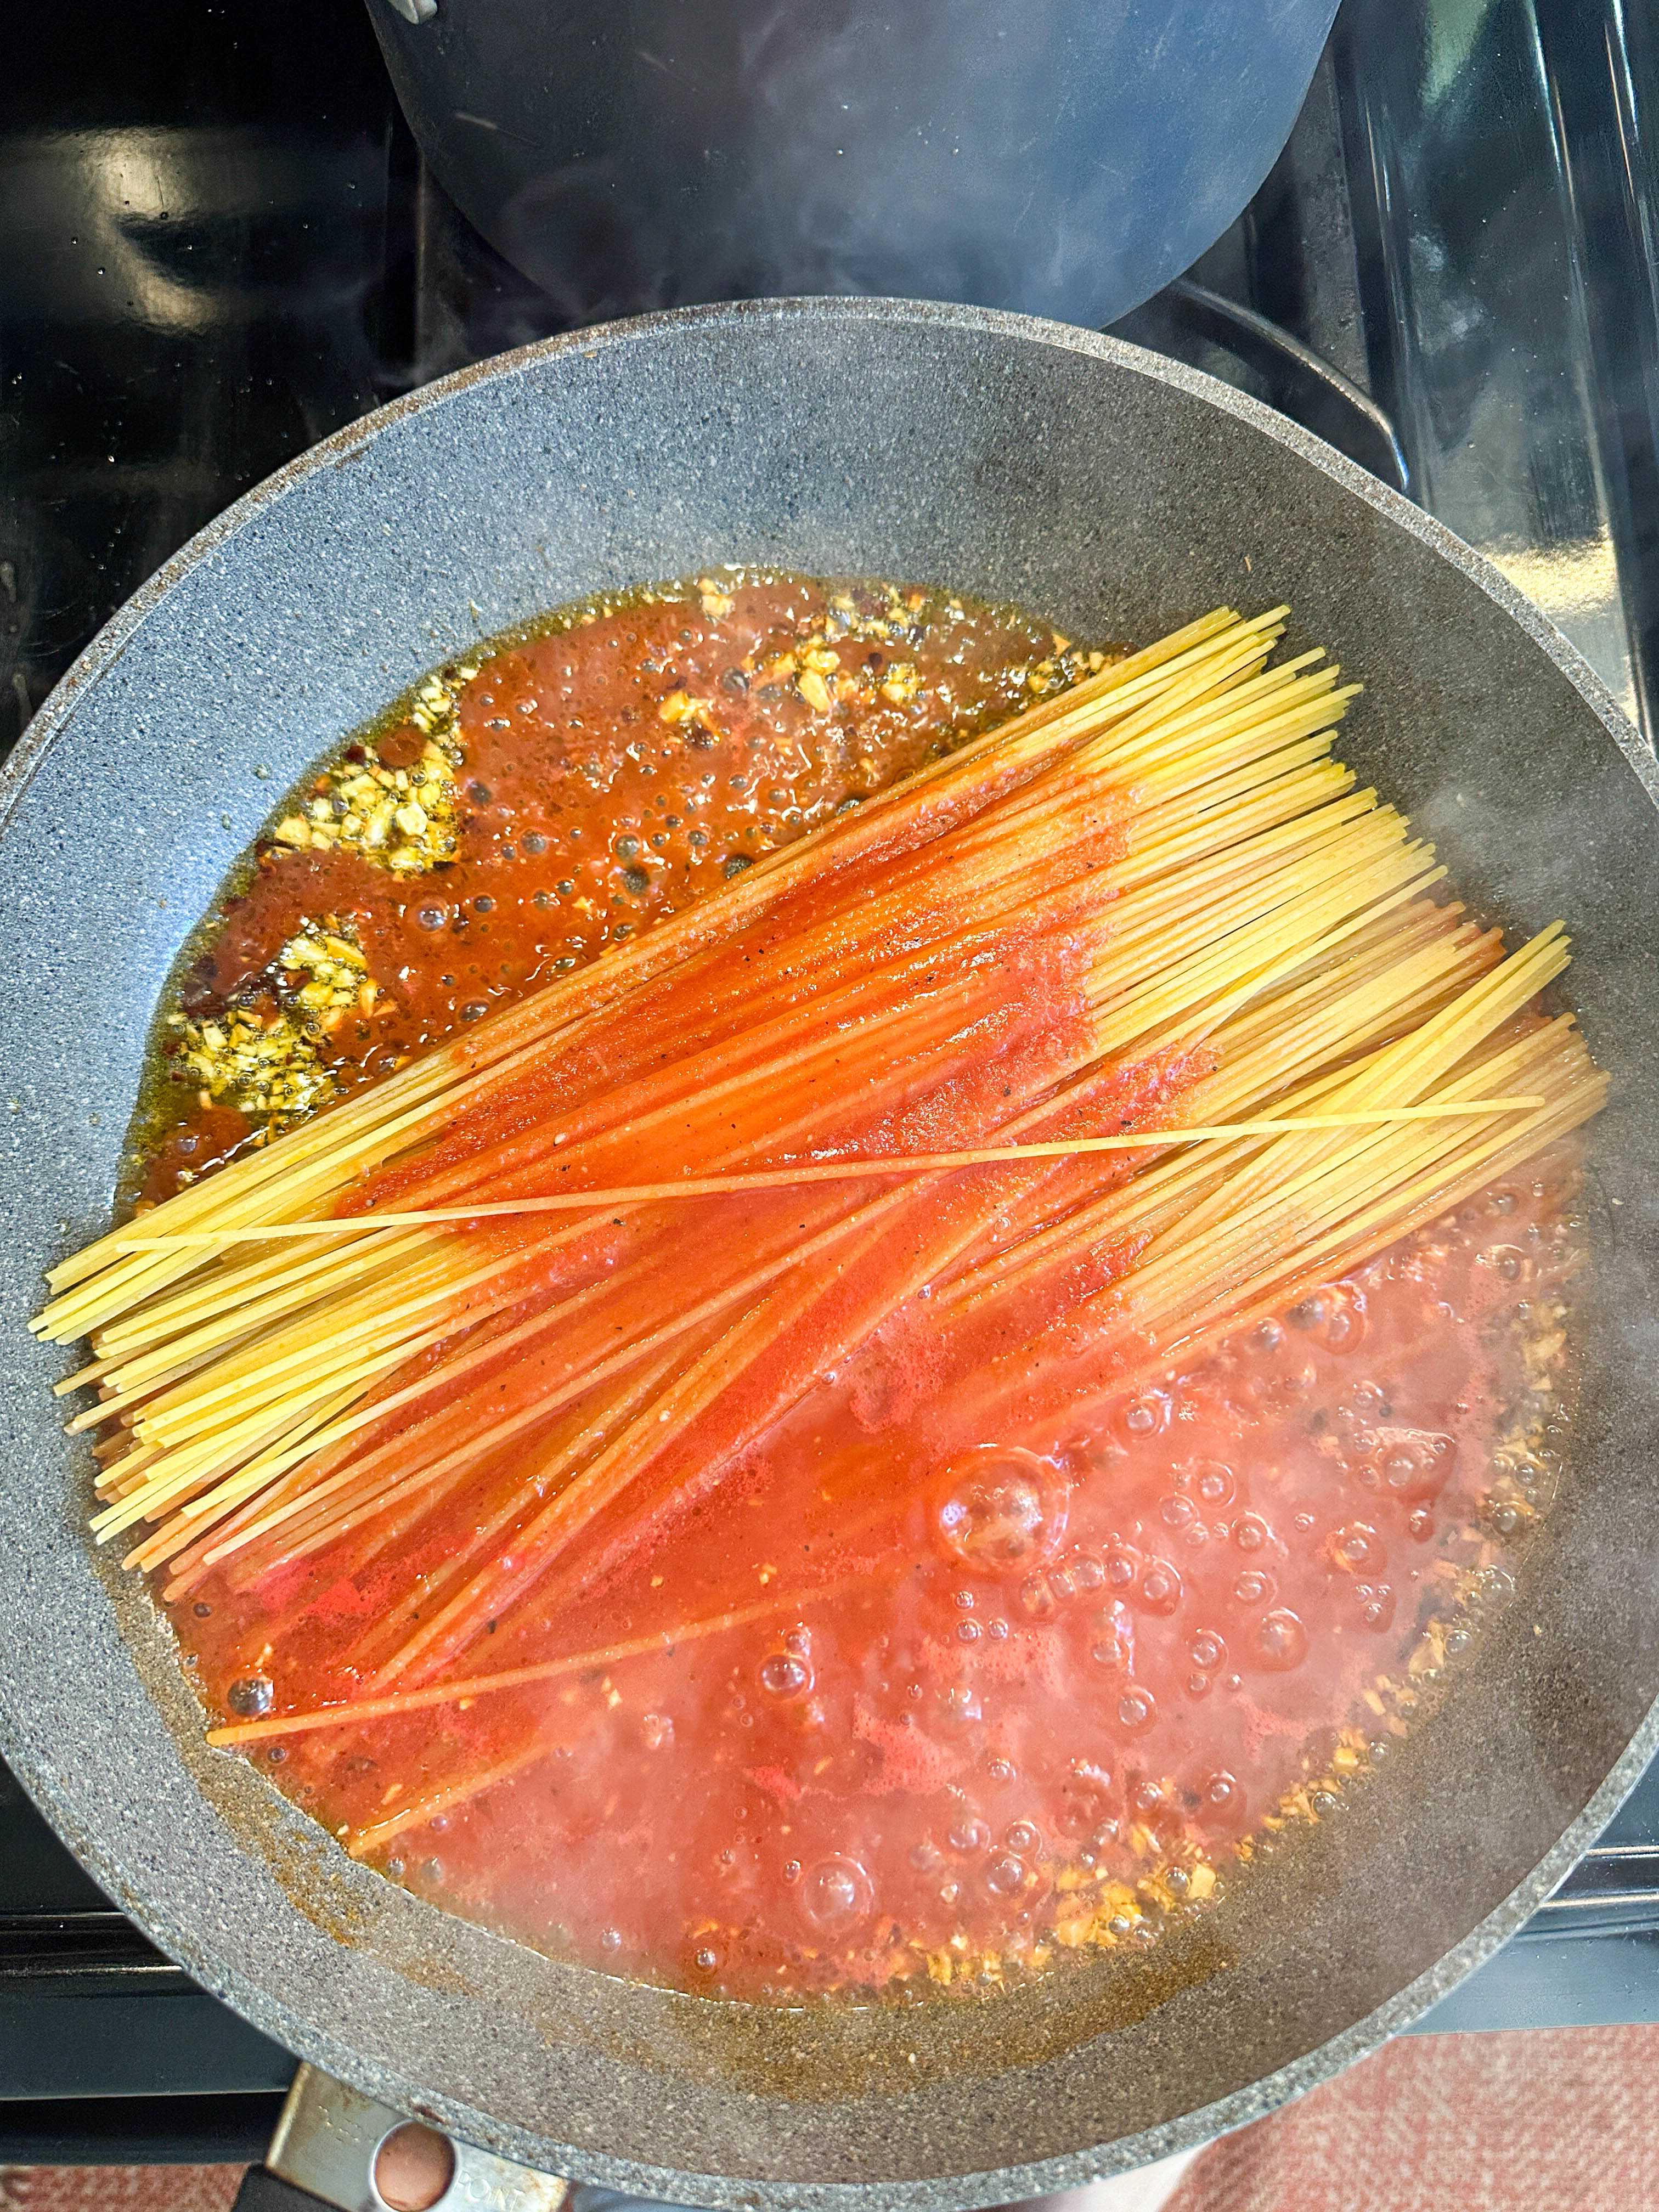 Spaghetti noodles half-submerged in boiling tomato sauce